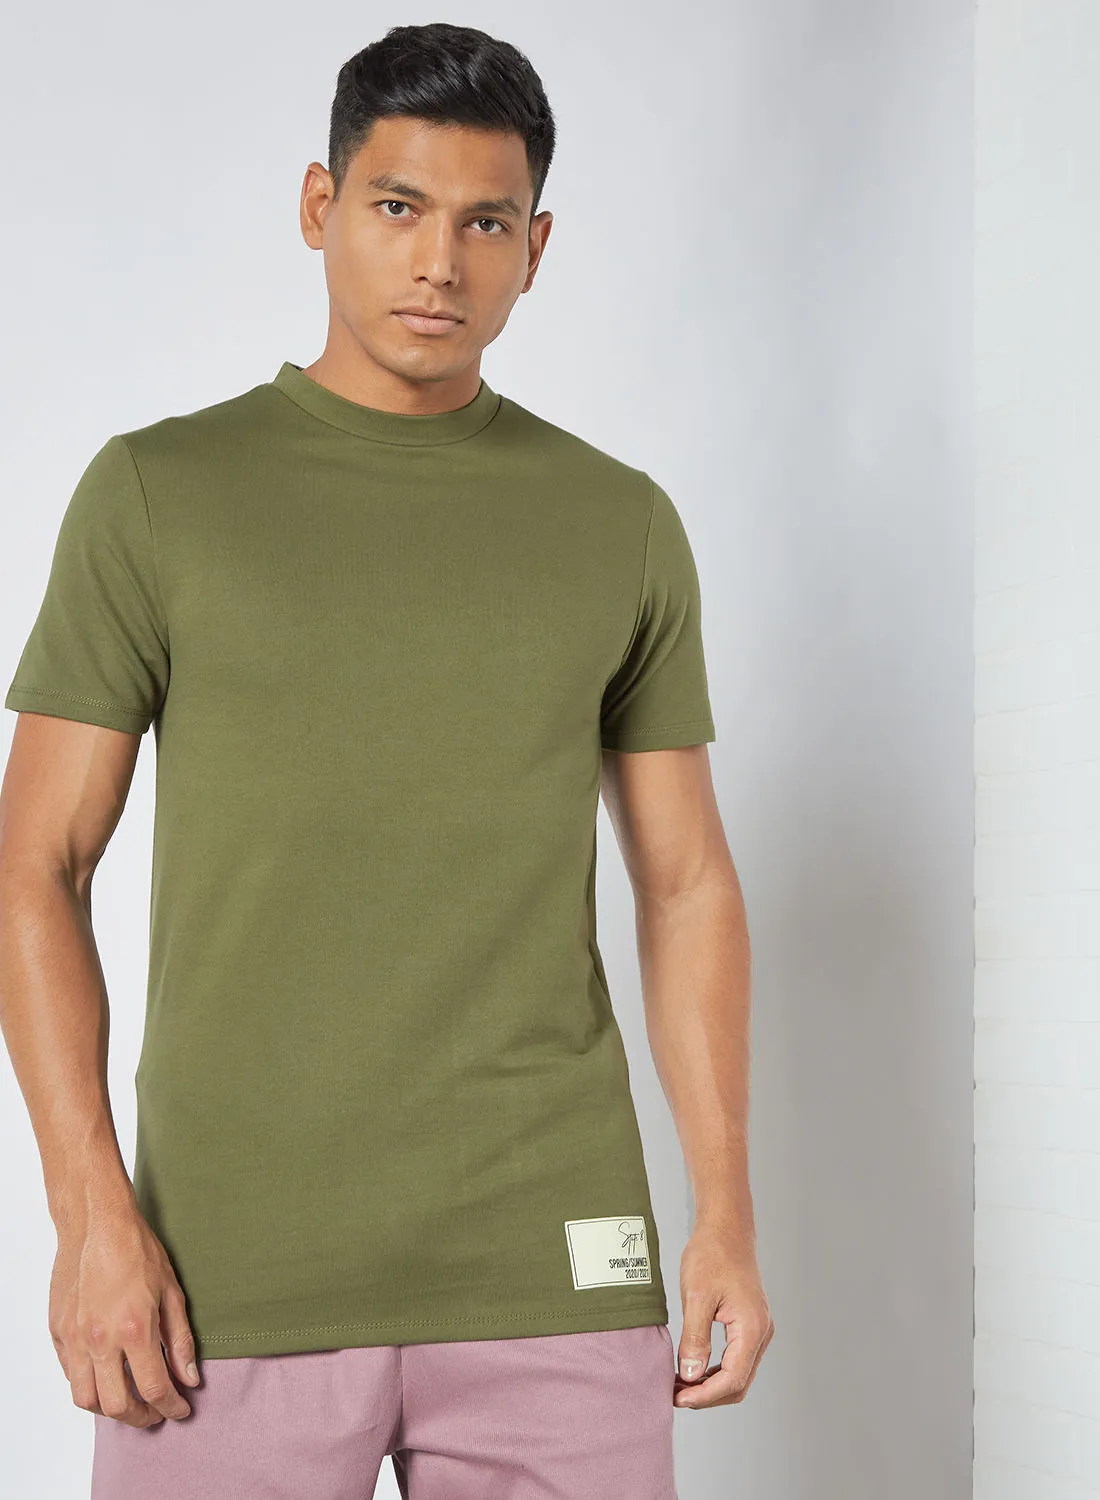 STATE 8 Oversized T-Shirt Olive